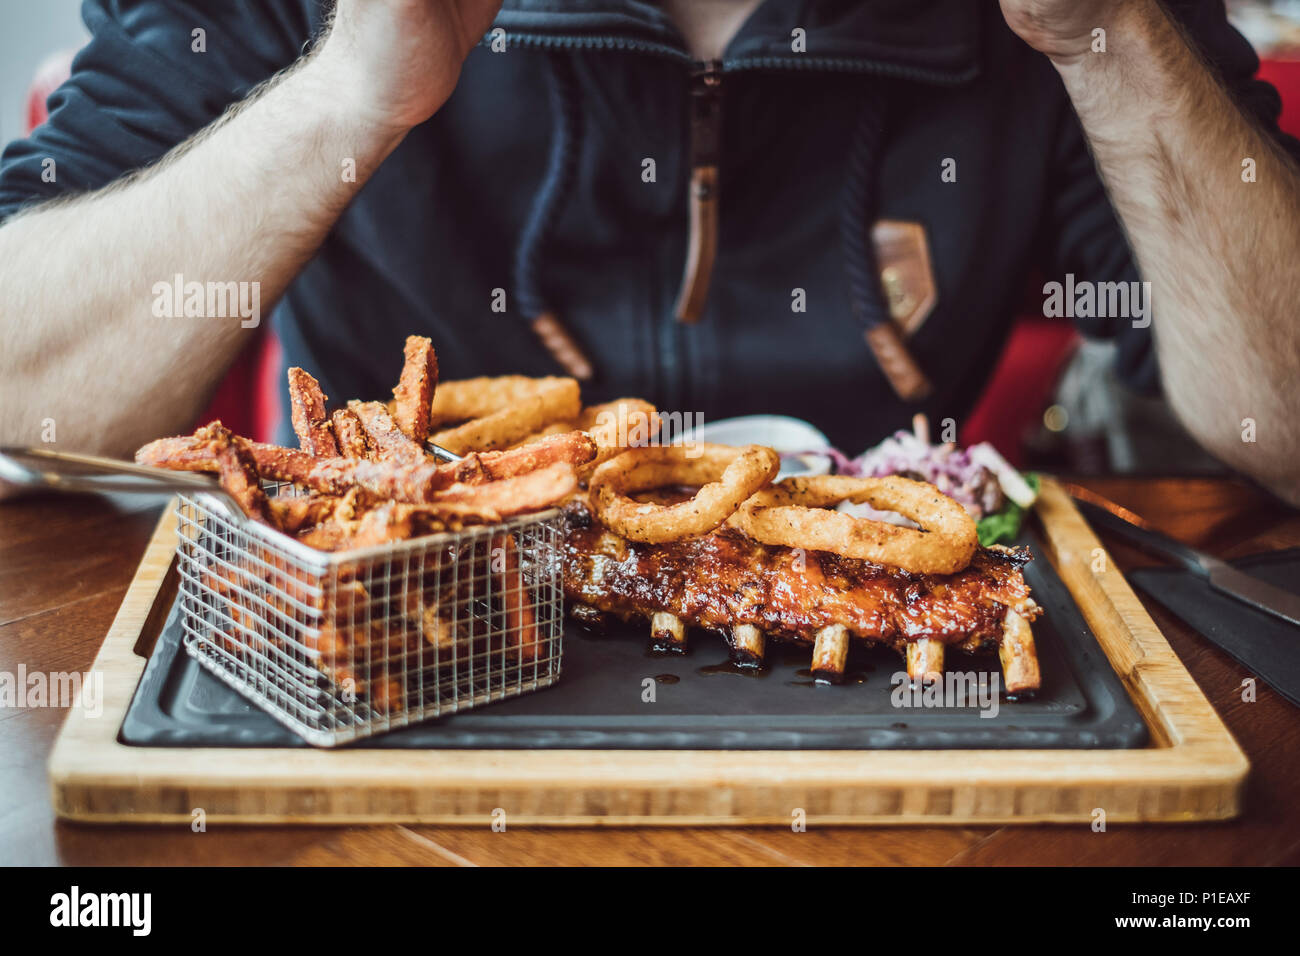 Man is eating fast food in a restaurant, Brighton, England Stock Photo